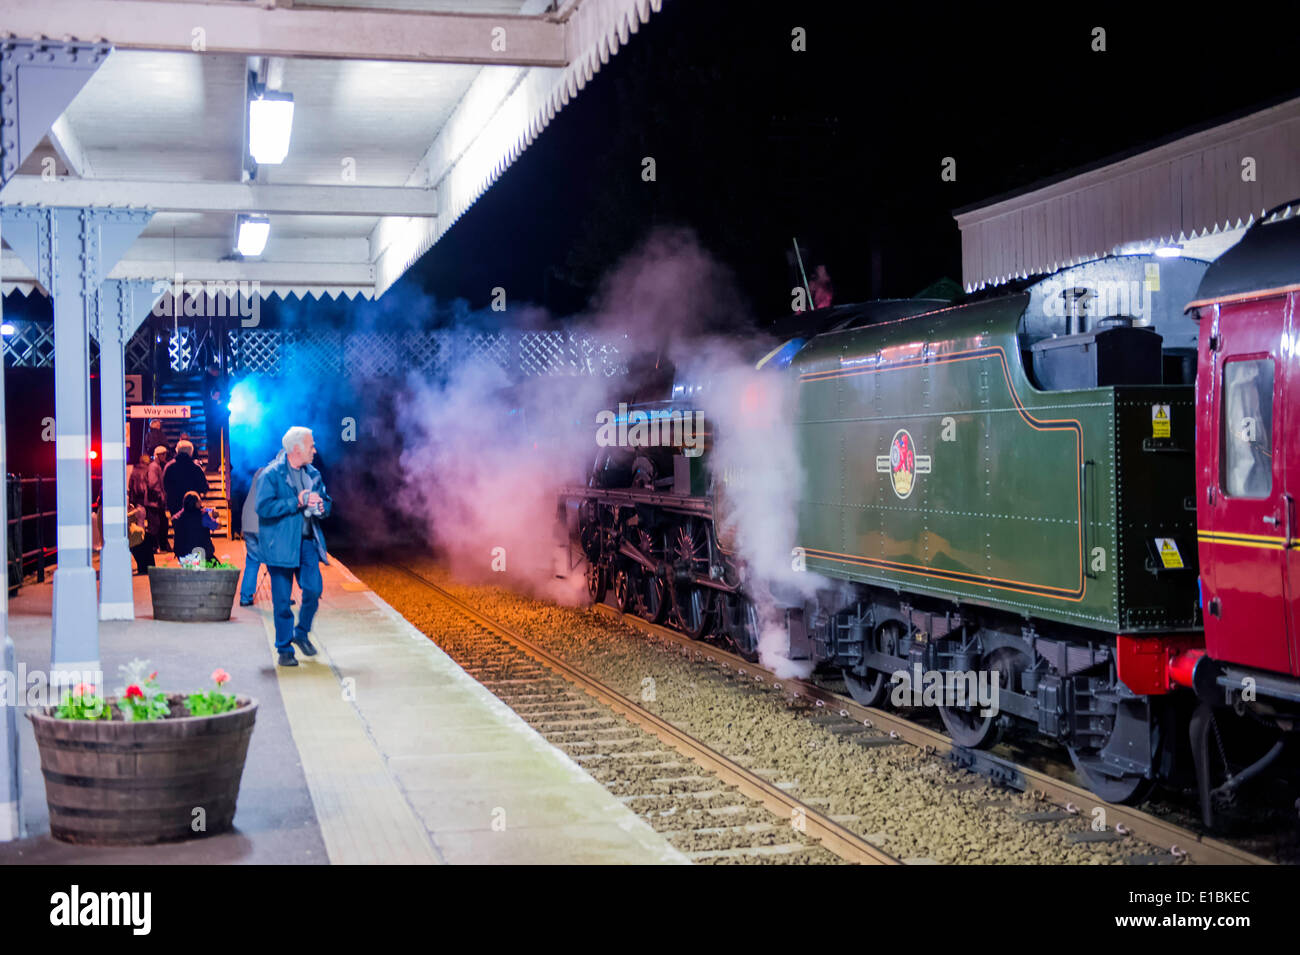 Norfolk, UK. 29th May, 2014. Just before midnight, train spotters and steam enthusiasts gather at Wymondham station Norfolk for the arrival of LMS Jubilee Class 6P 4-6-0 no 45699 Galatea LMS Roal Scot Class 7P 4-6-0 no 46115 Scots Guardsman LMS Class 8F 2-8-0 no 48151 on their journey from Carnforth to Dereham for the weekend steam gala. Credit:  Major Gilbert/Alamy Live News Stock Photo